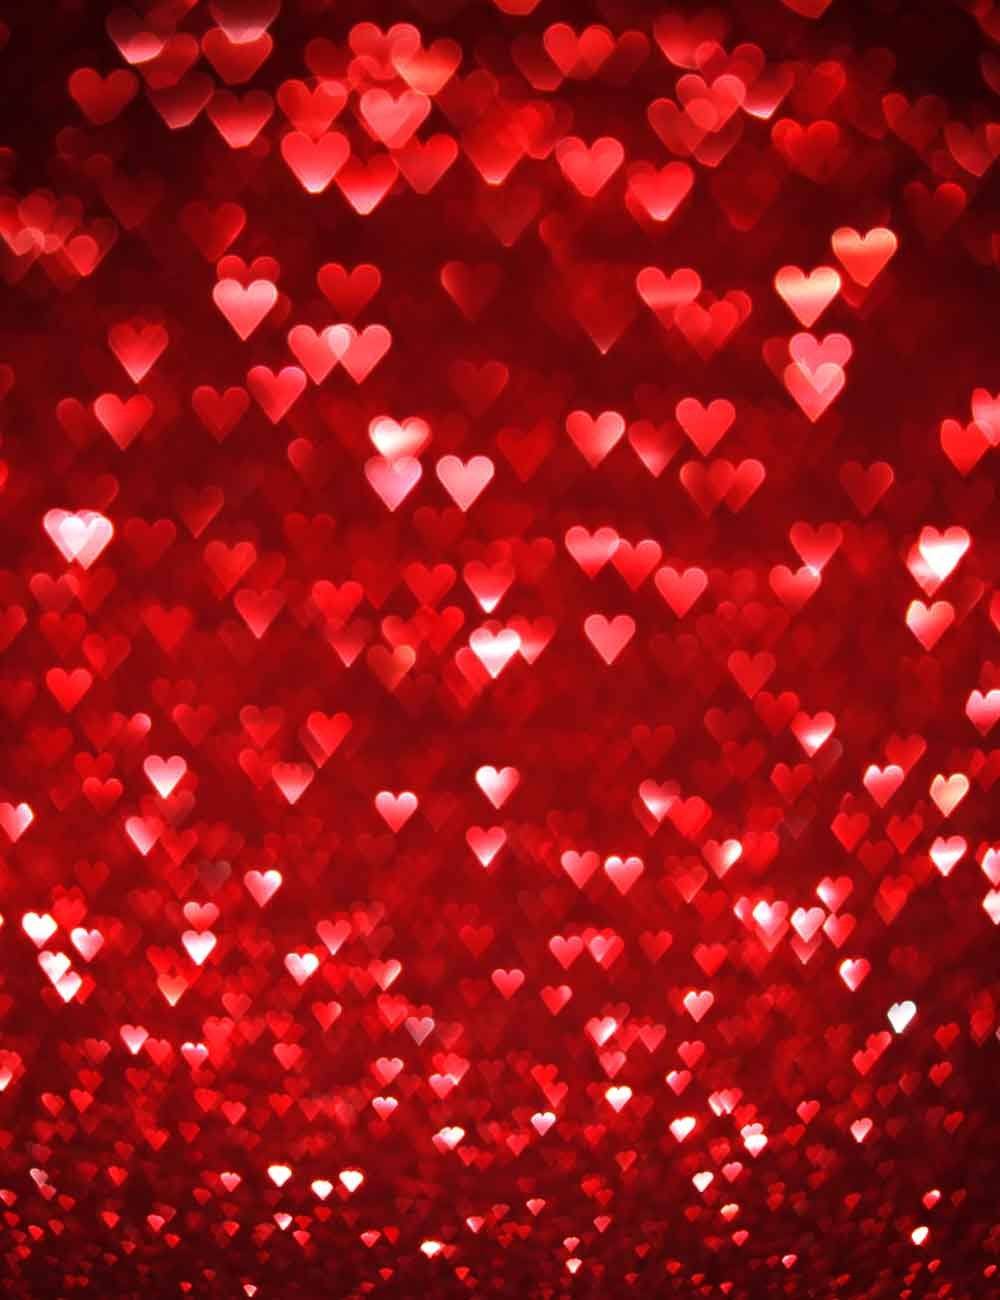 Red Hearts Sparkles For Wedding Photography Backdrop Shopbackdrop